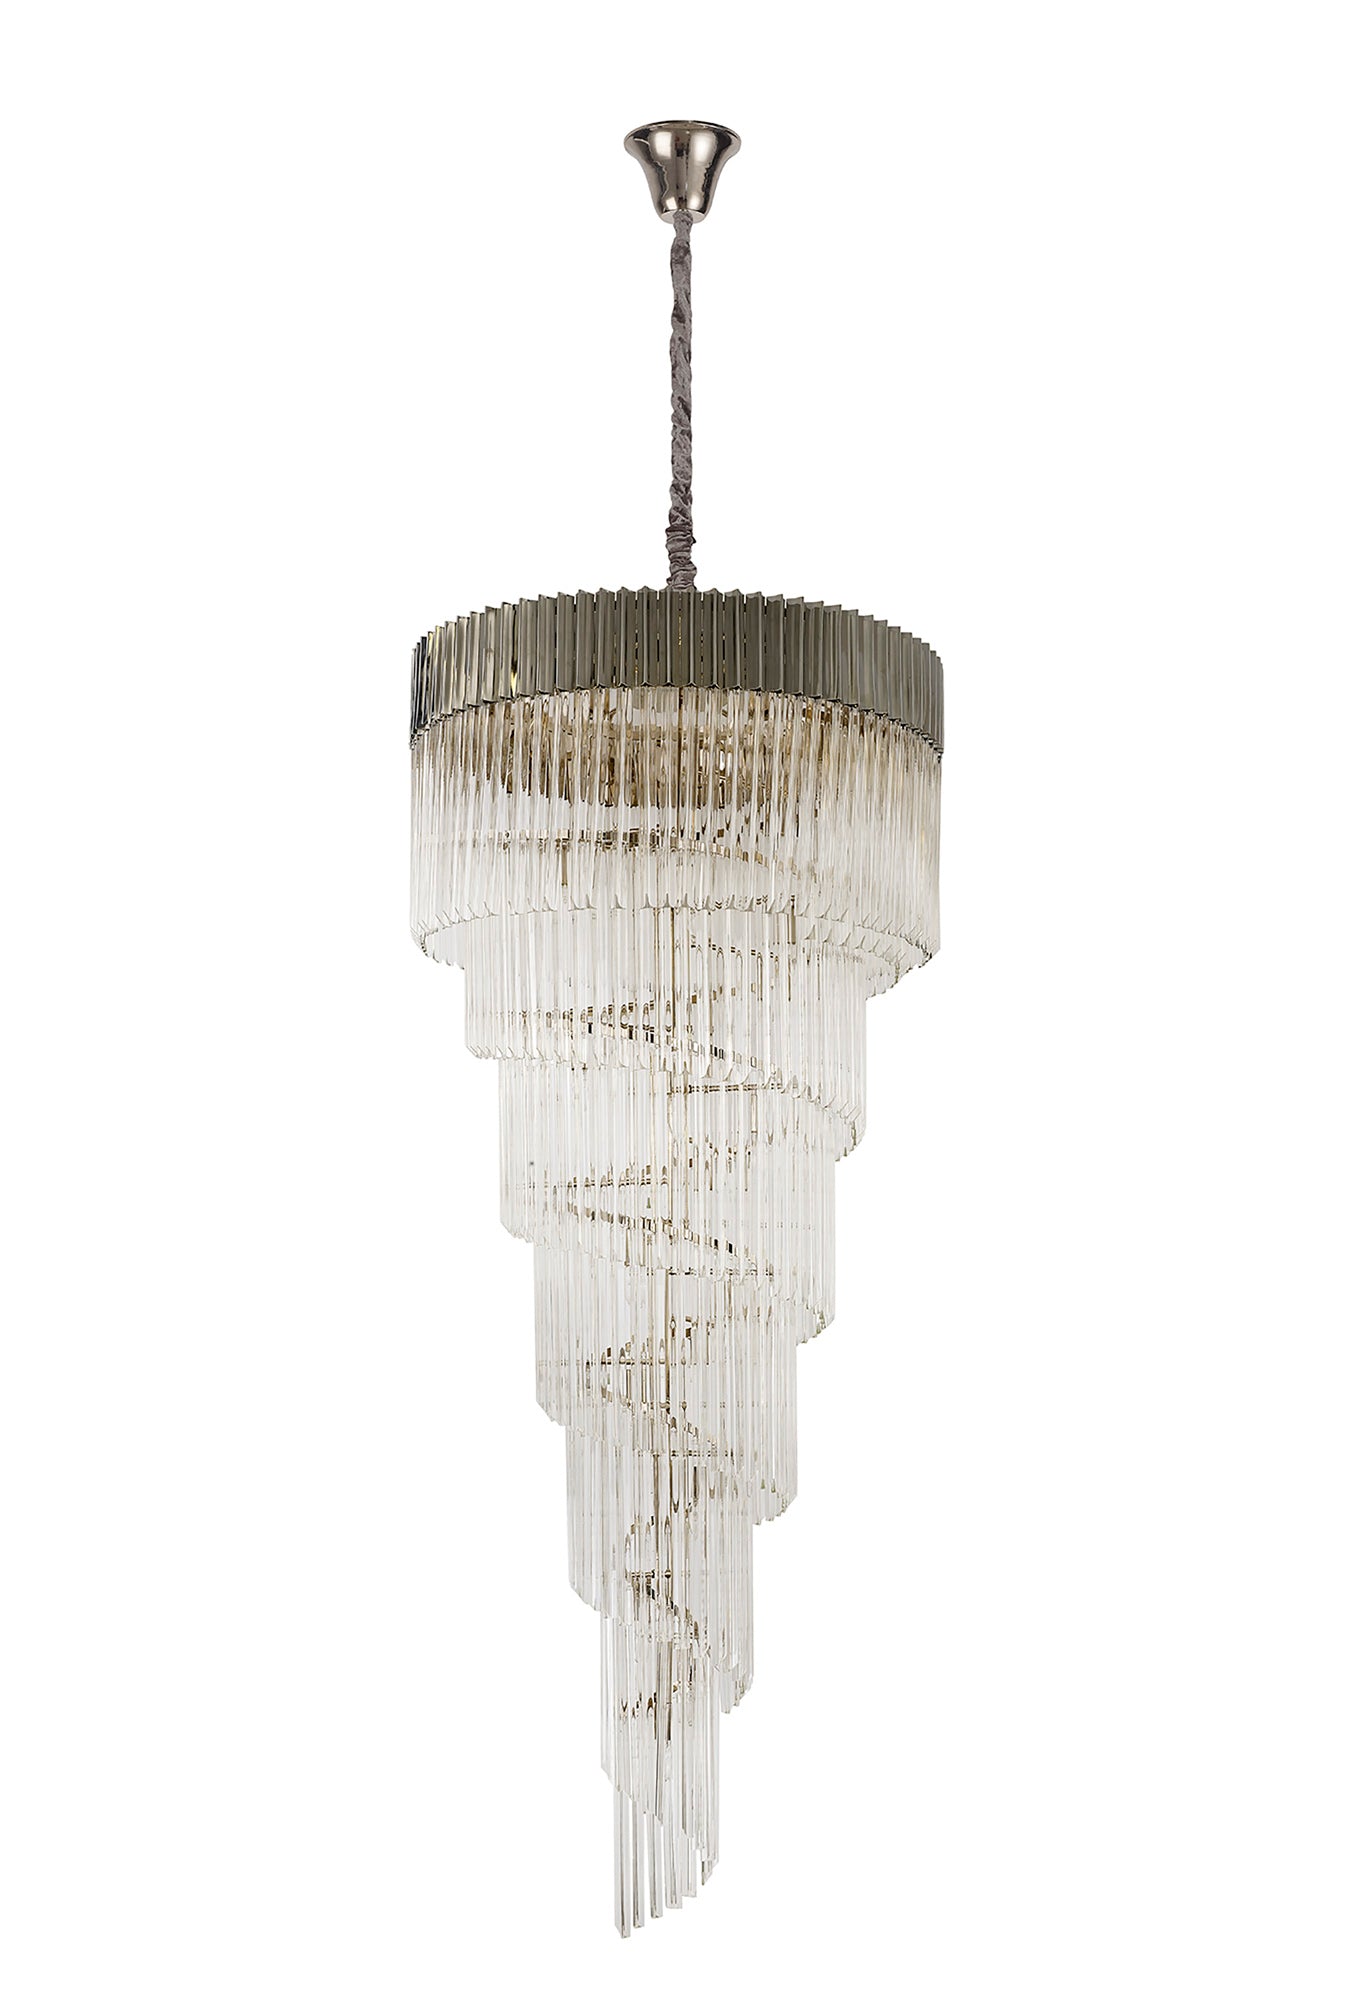 Knightsbridge Pendant Round 7 Tier 31 Light E14, Polished Nickel/Clear Glass - LO182443. Item Weight: 92.7kg